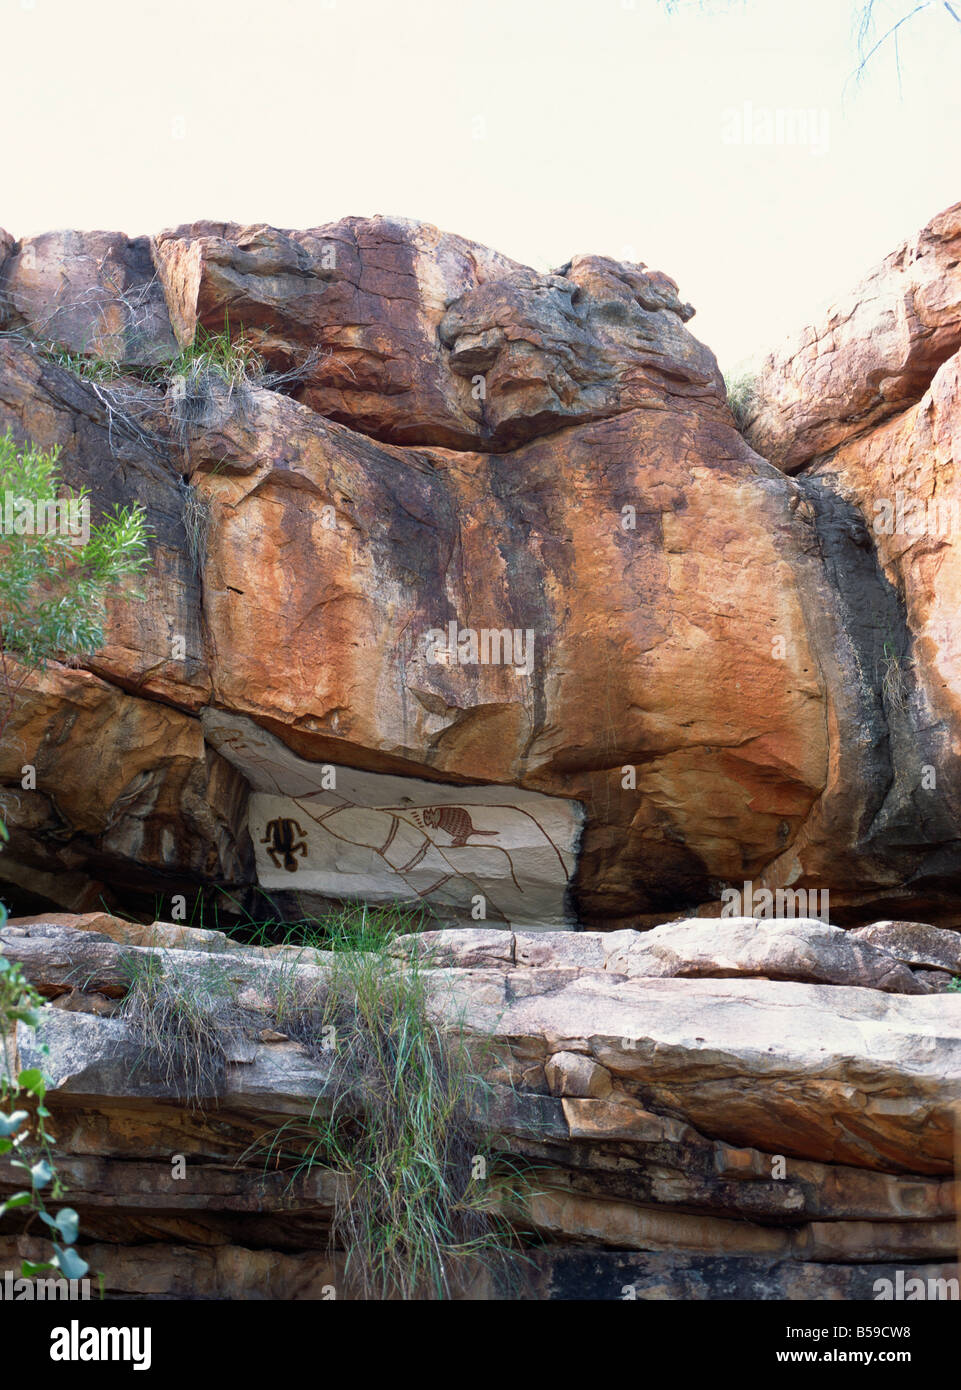 Restored Aboriginal paintings in cliffs in Manning Creek Gorge Gibb River Road Kimberley West Australia Australia Pacific Stock Photo